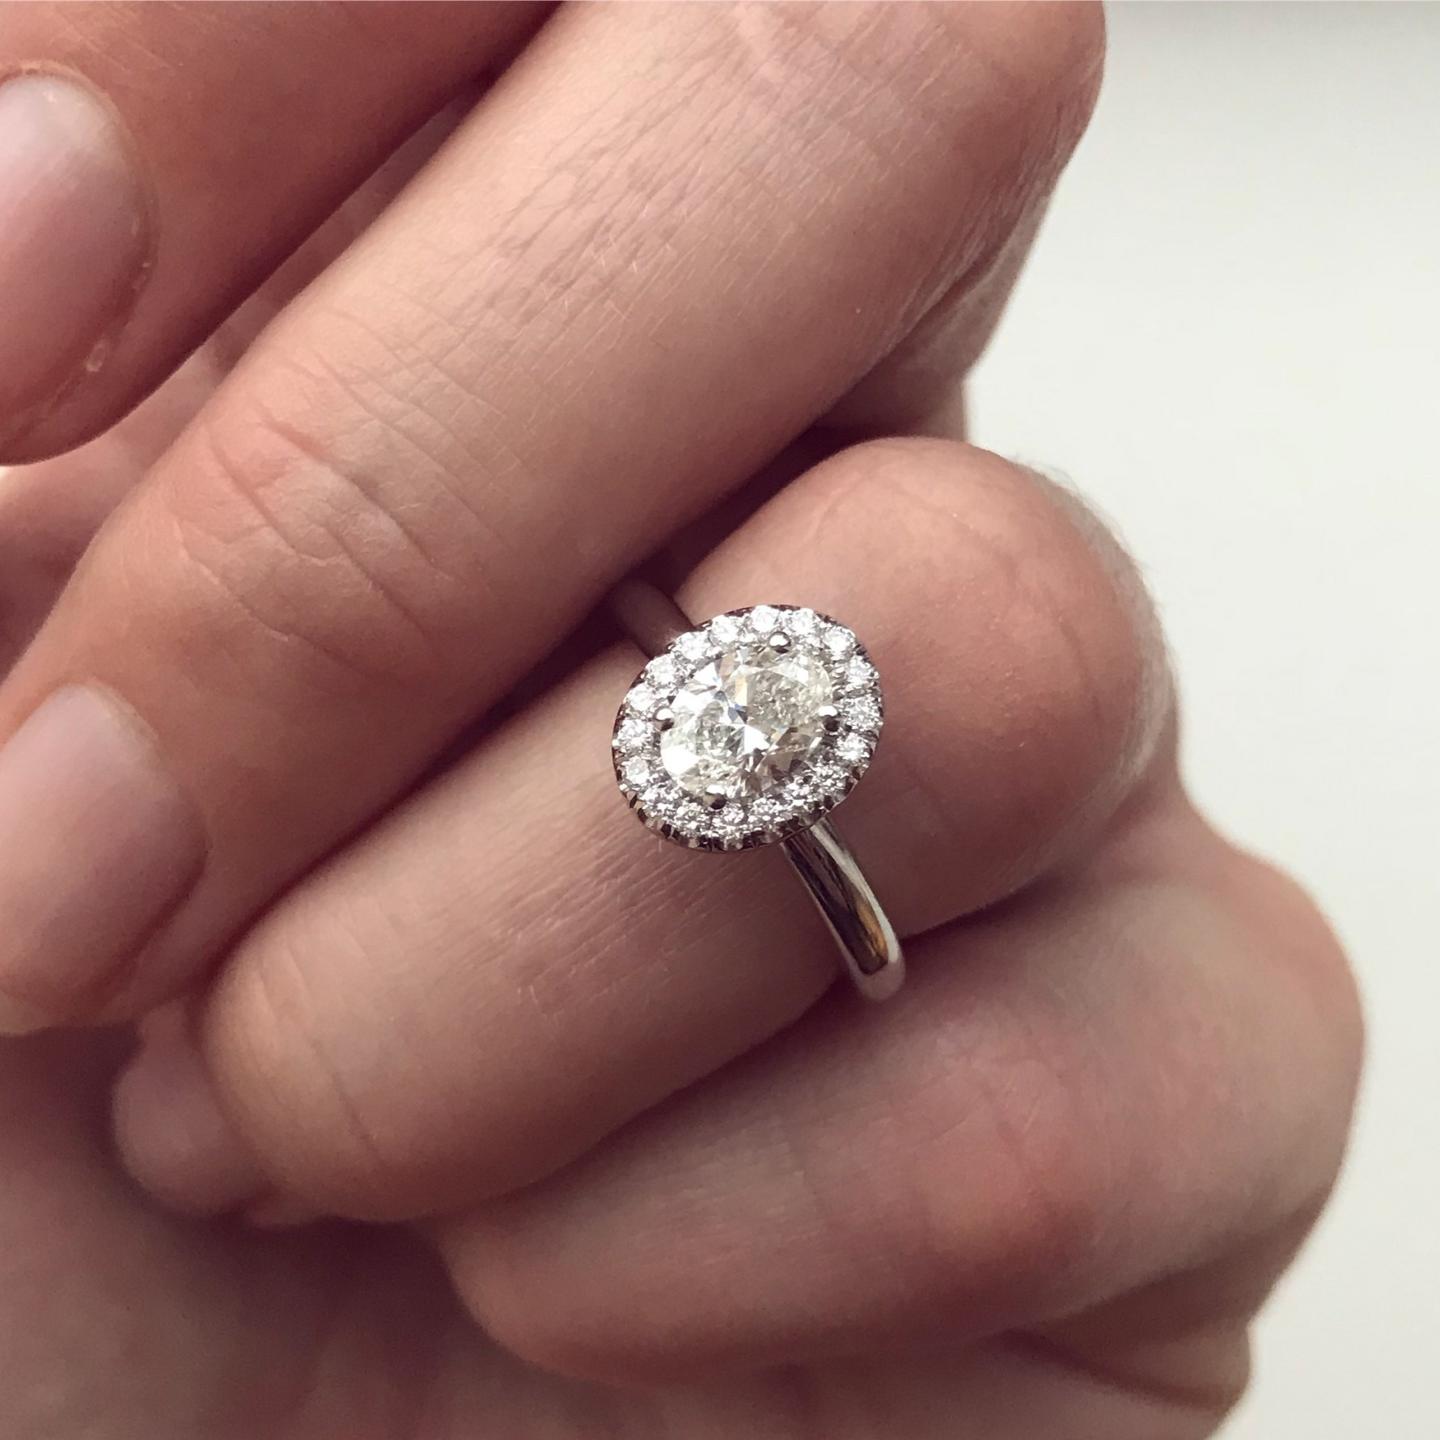 How do I get my engagement ring through customs?